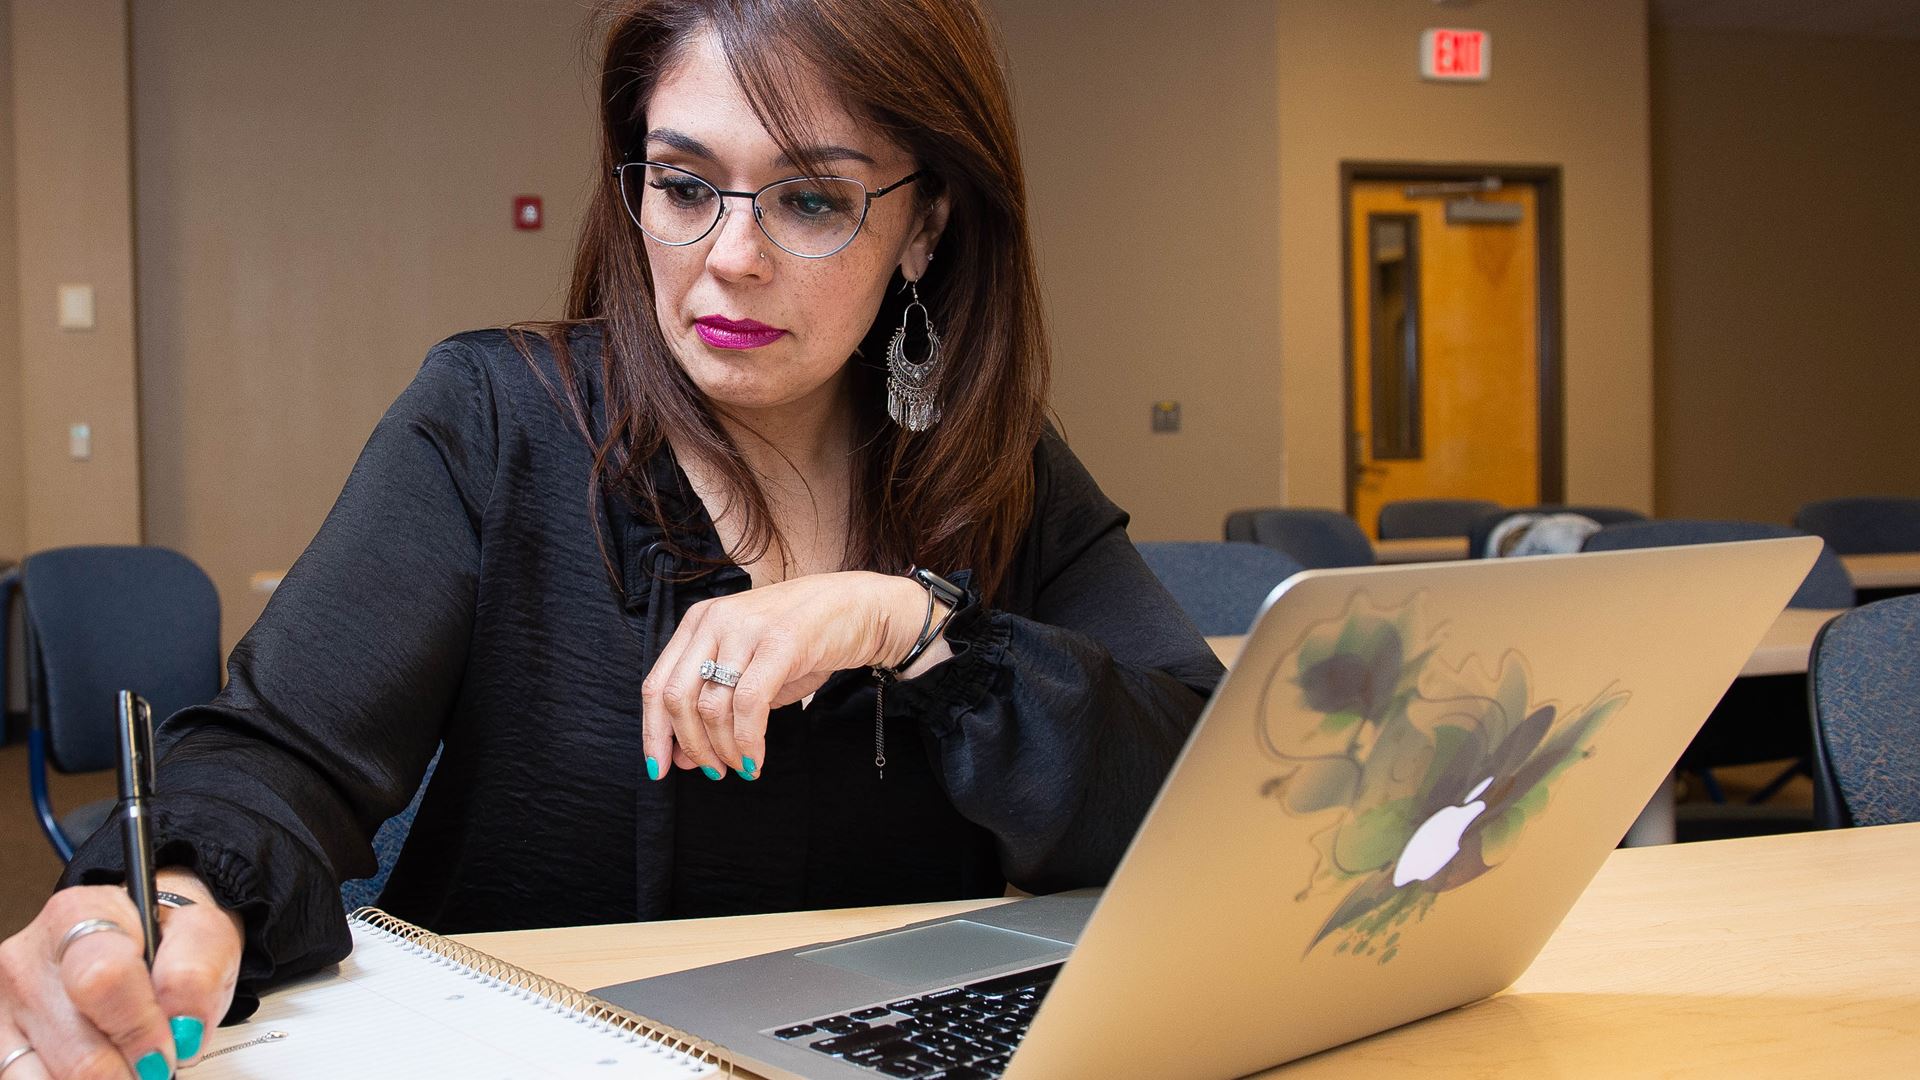 NMSU prepares for online instruction, staff, faculty assist colleagues